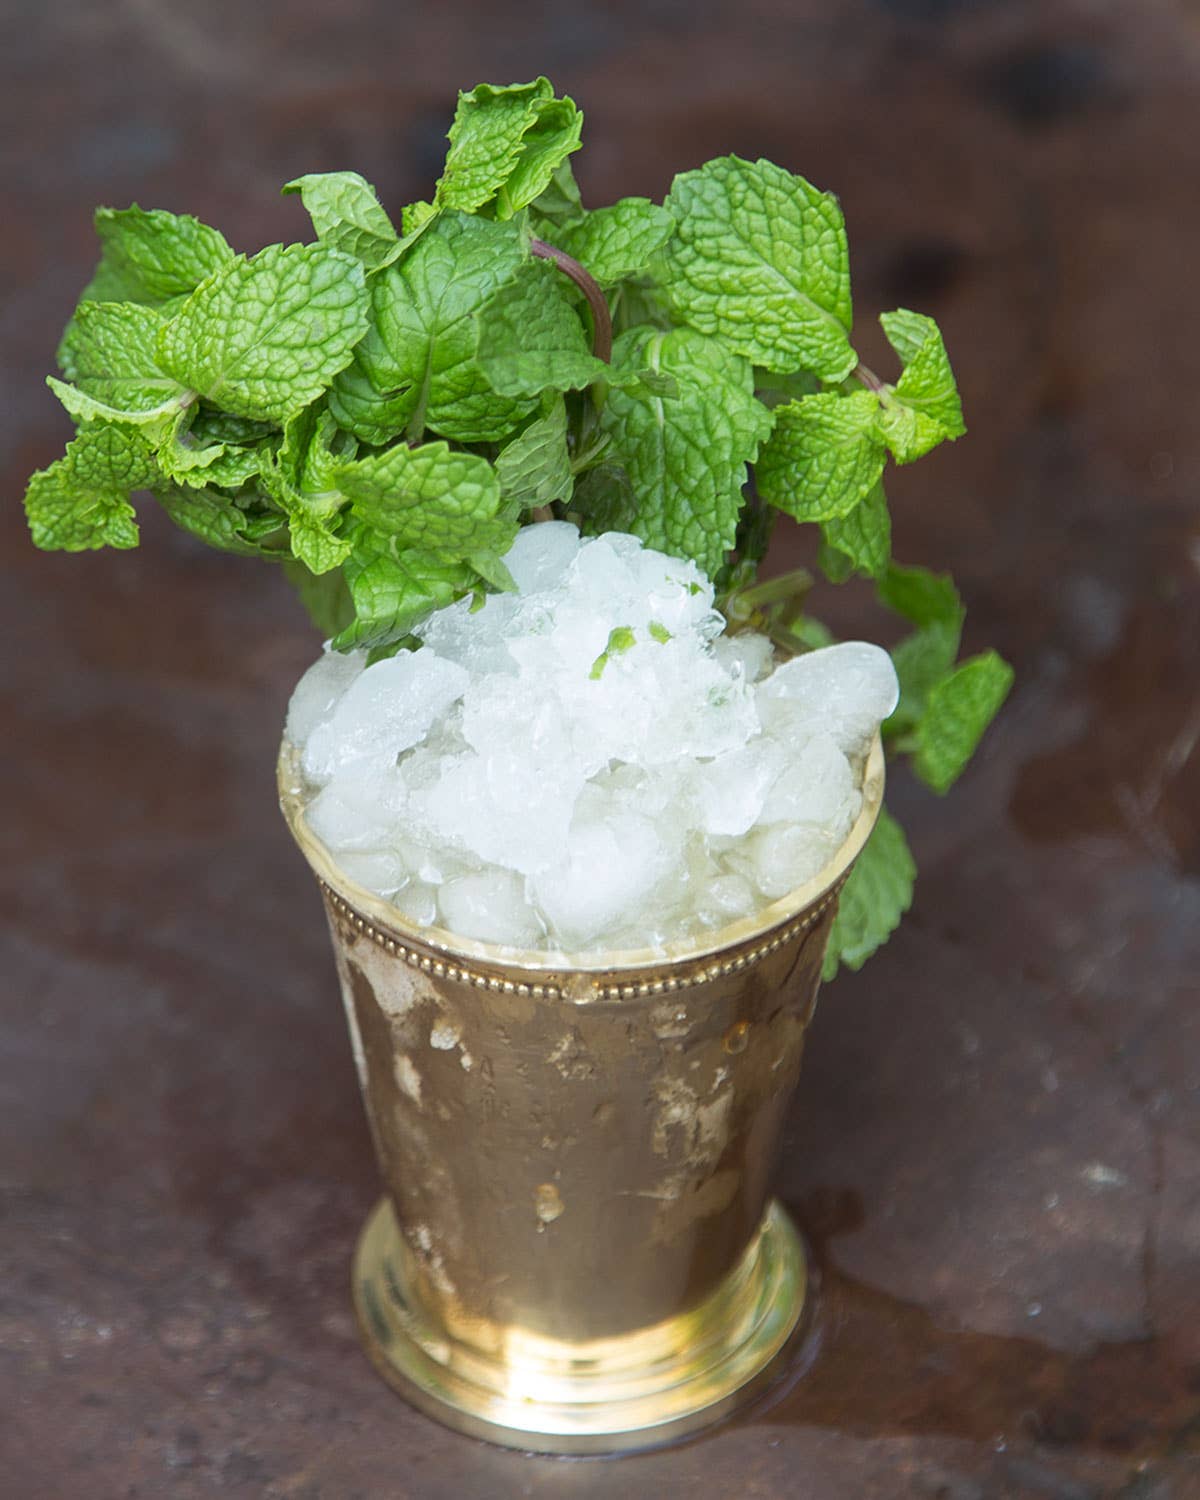 The Right Way to Make a Mint Julep